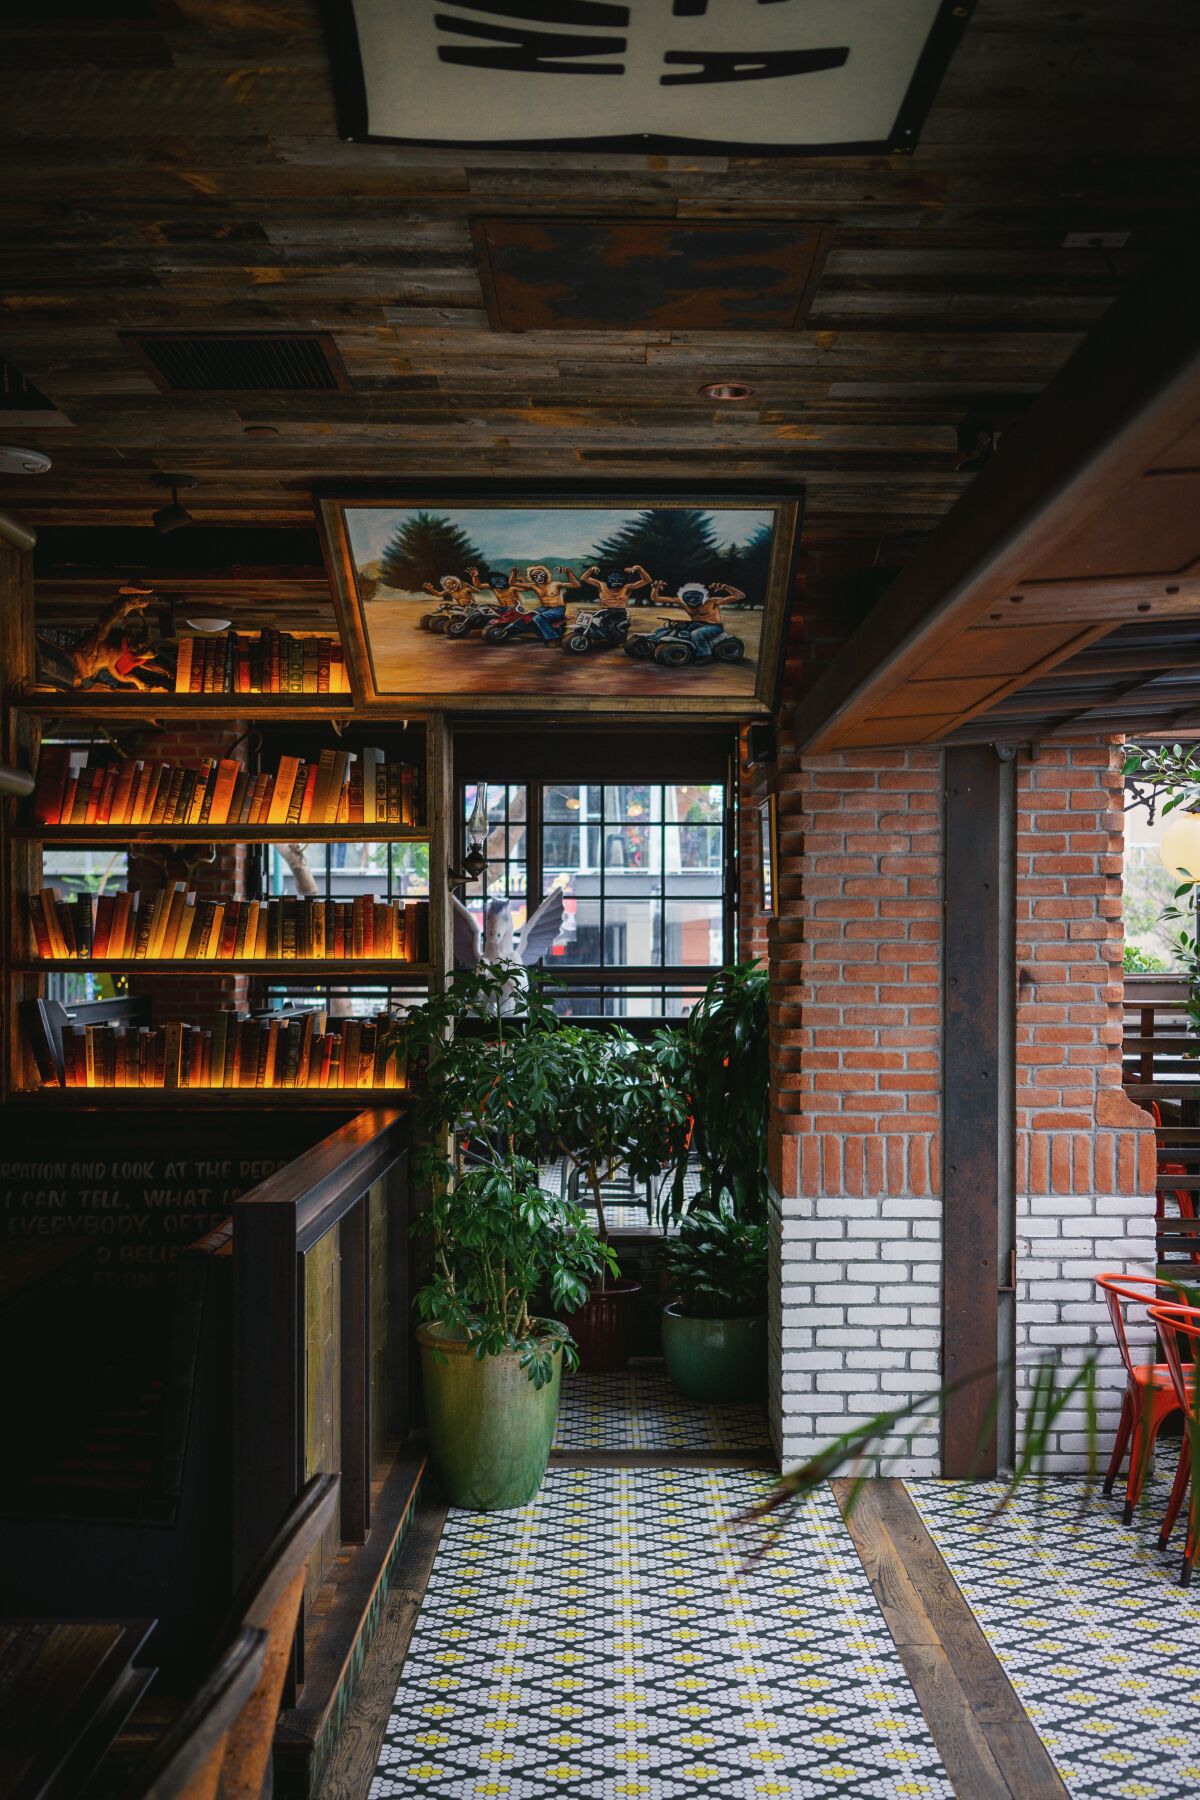 A photo of Craft & Commerce's interior